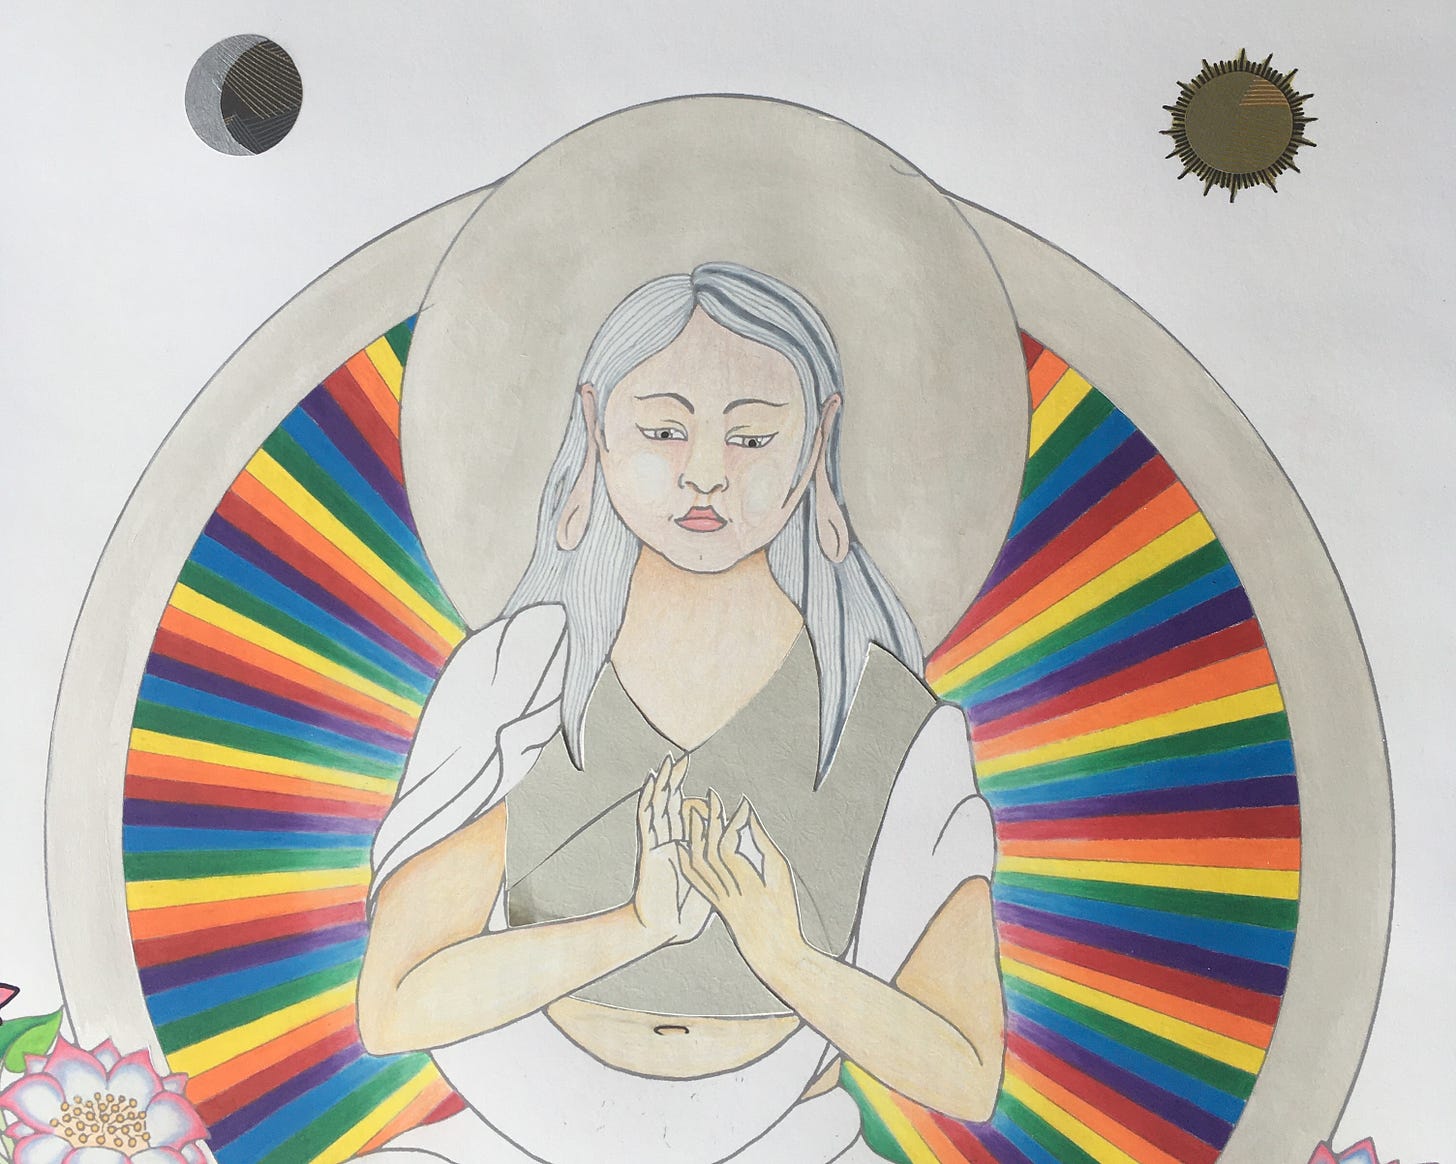 Vairochana image showing much more completion, including pearl white acrylic paint in the circle around her head and around the outside of the rainbow radiance lines. Her hair is white with a few grey streaks in it. Above her on the left is a silver crescent moon over black and gold washi paper cut into a circle. Above her on the right is a gold sun cut from washi paper with gold radiance lines extending out from it.